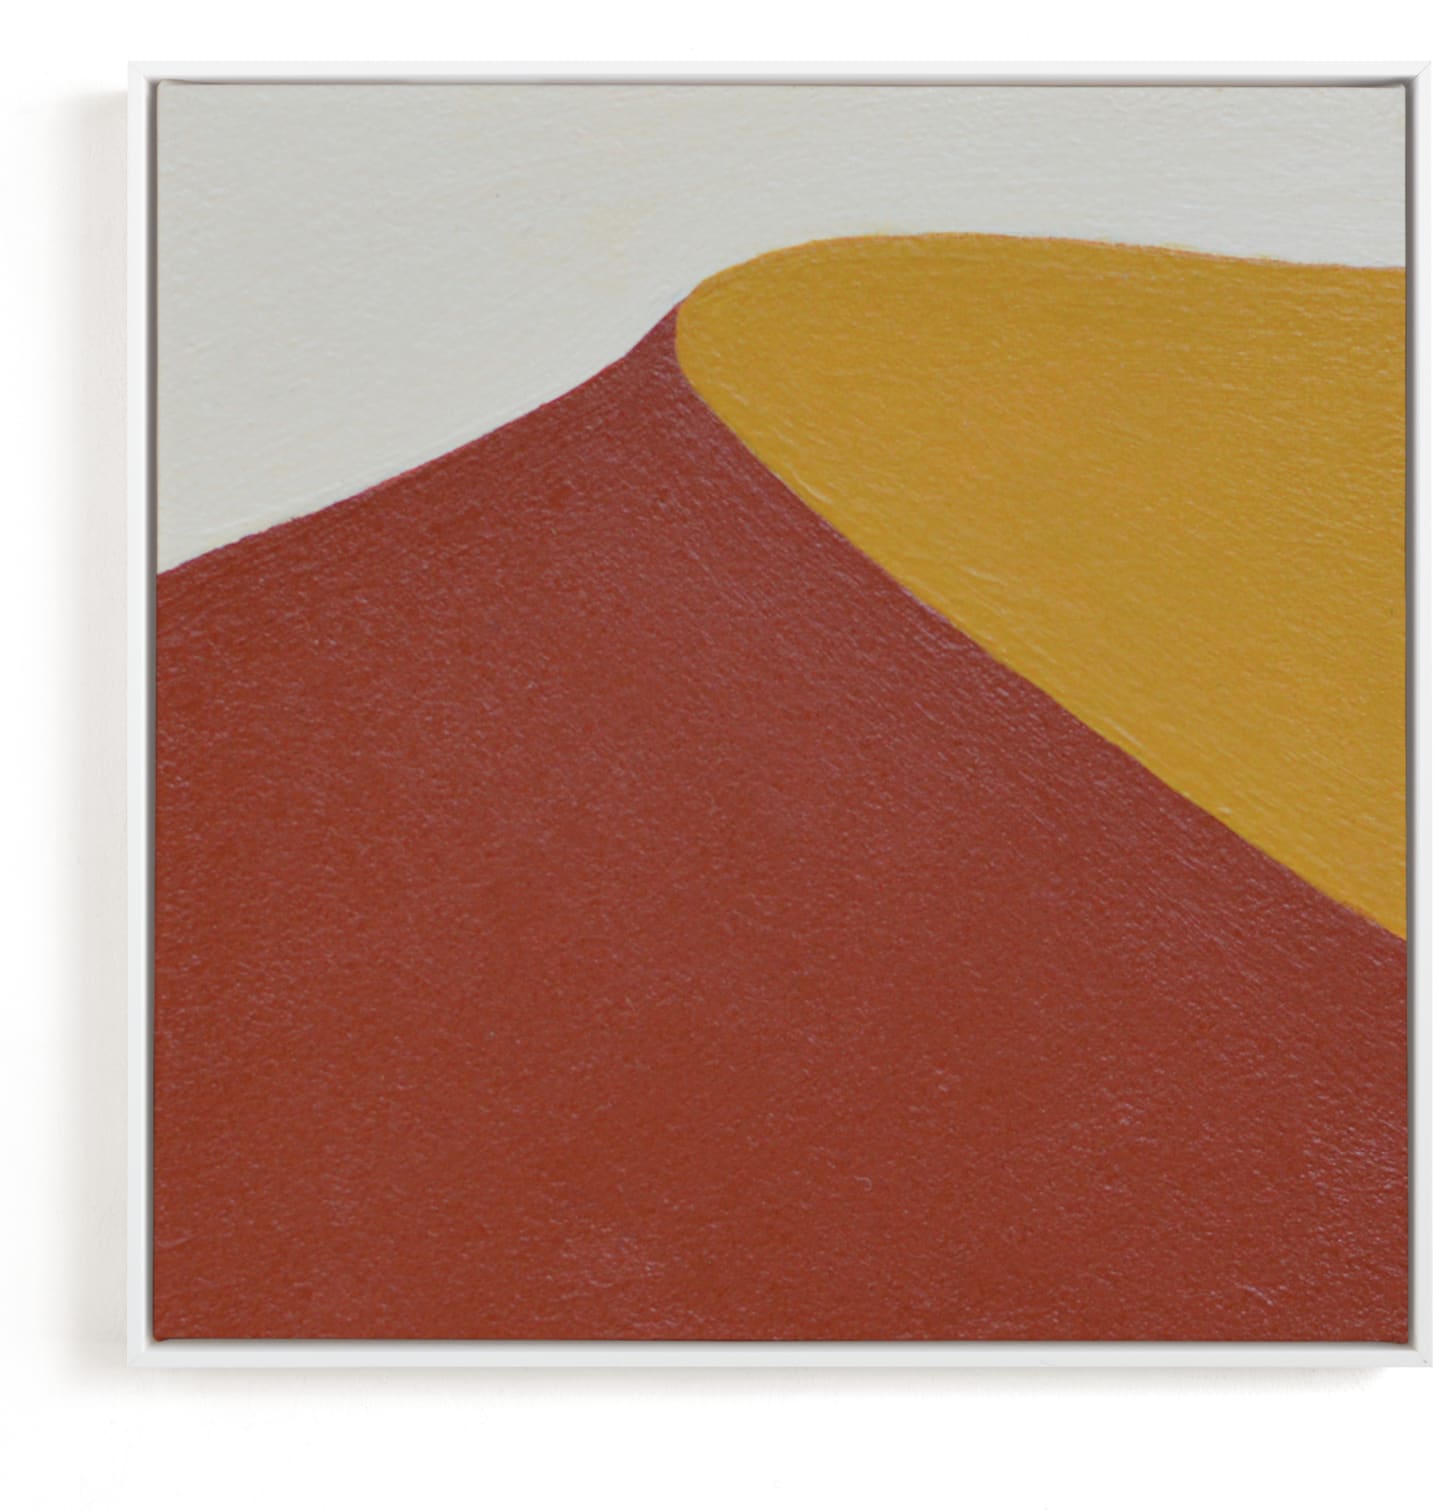 This is a yellow art by Alina Knechtle called Sam Sand Dunes III.